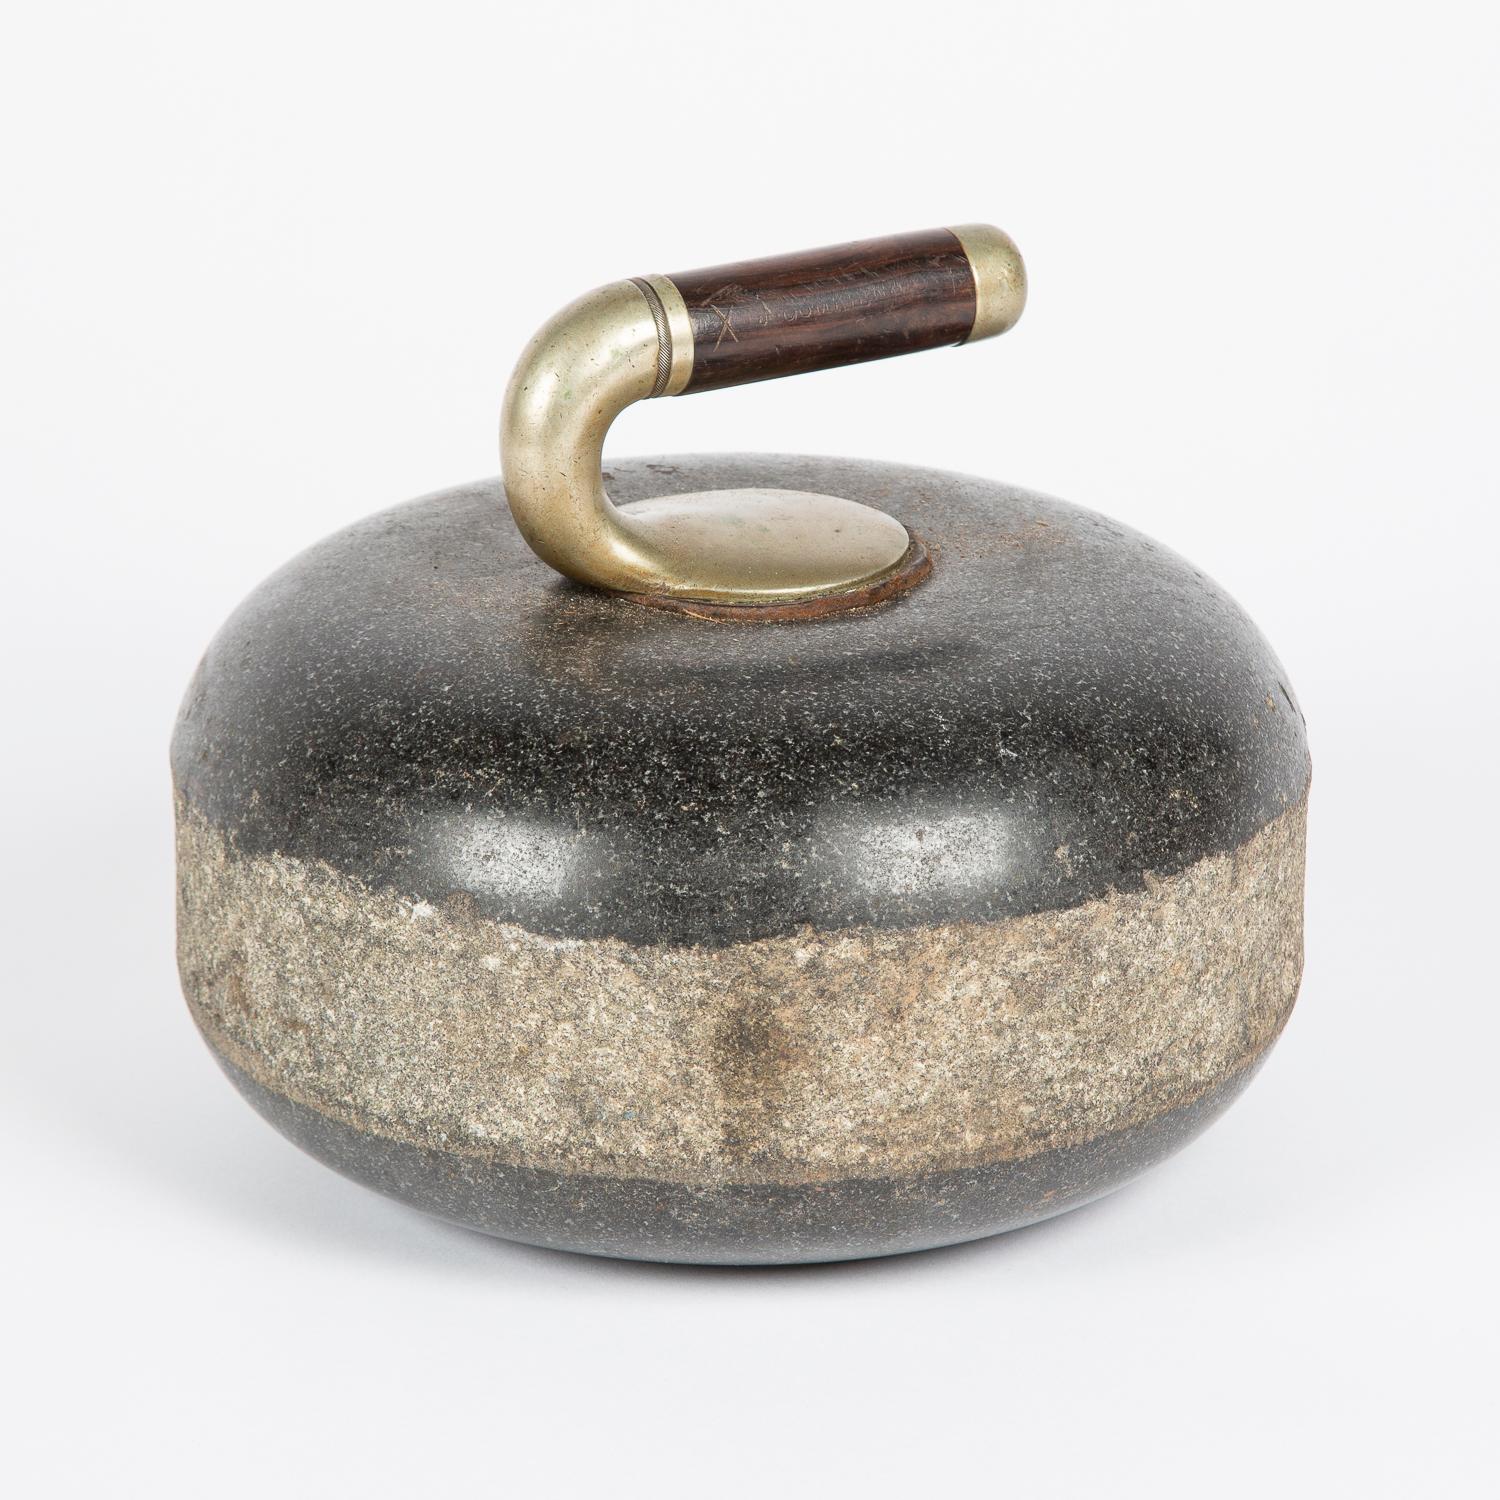 curling stone paperweight